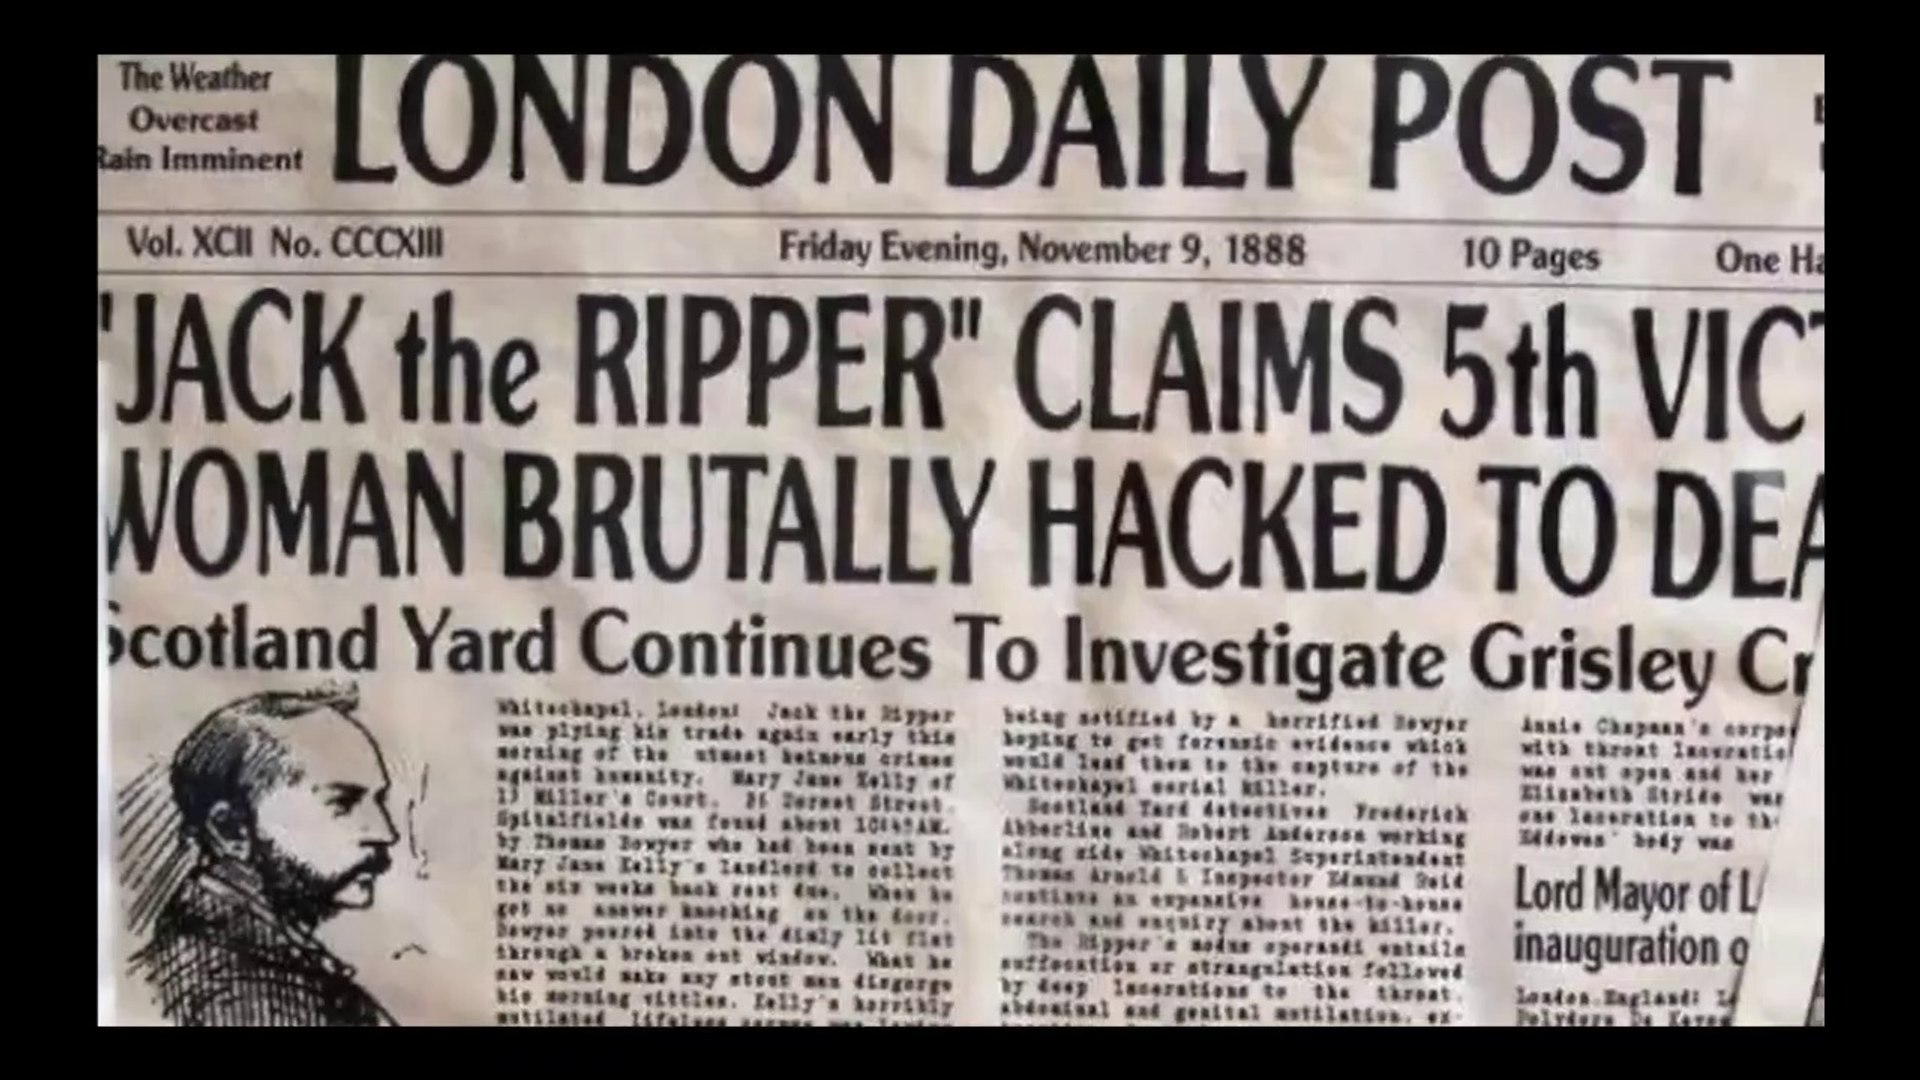 The grisly murders of jack the ripper